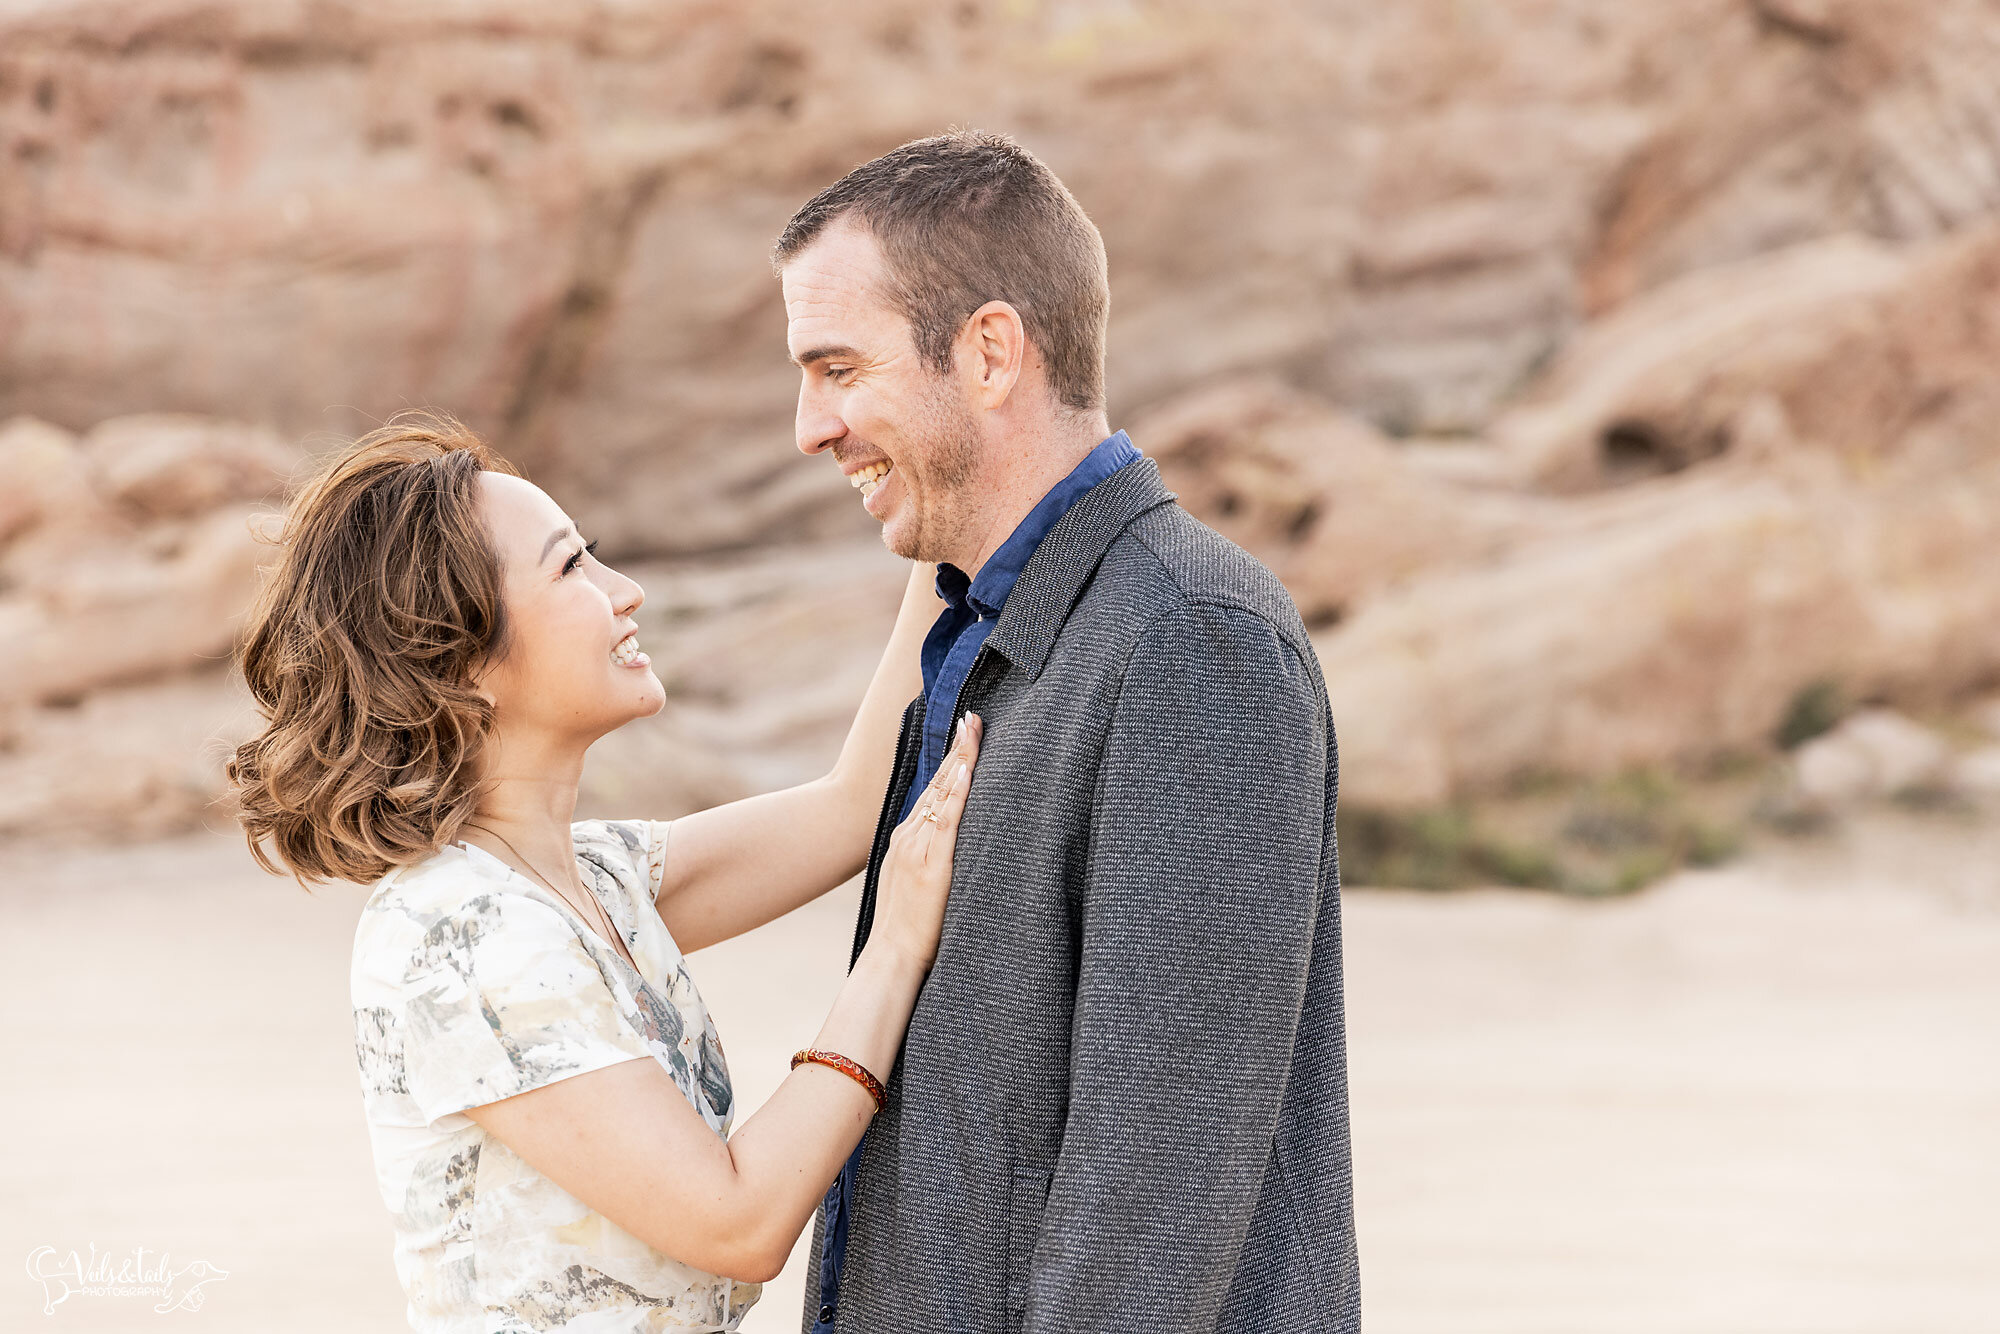 muted colors engagement session photographer